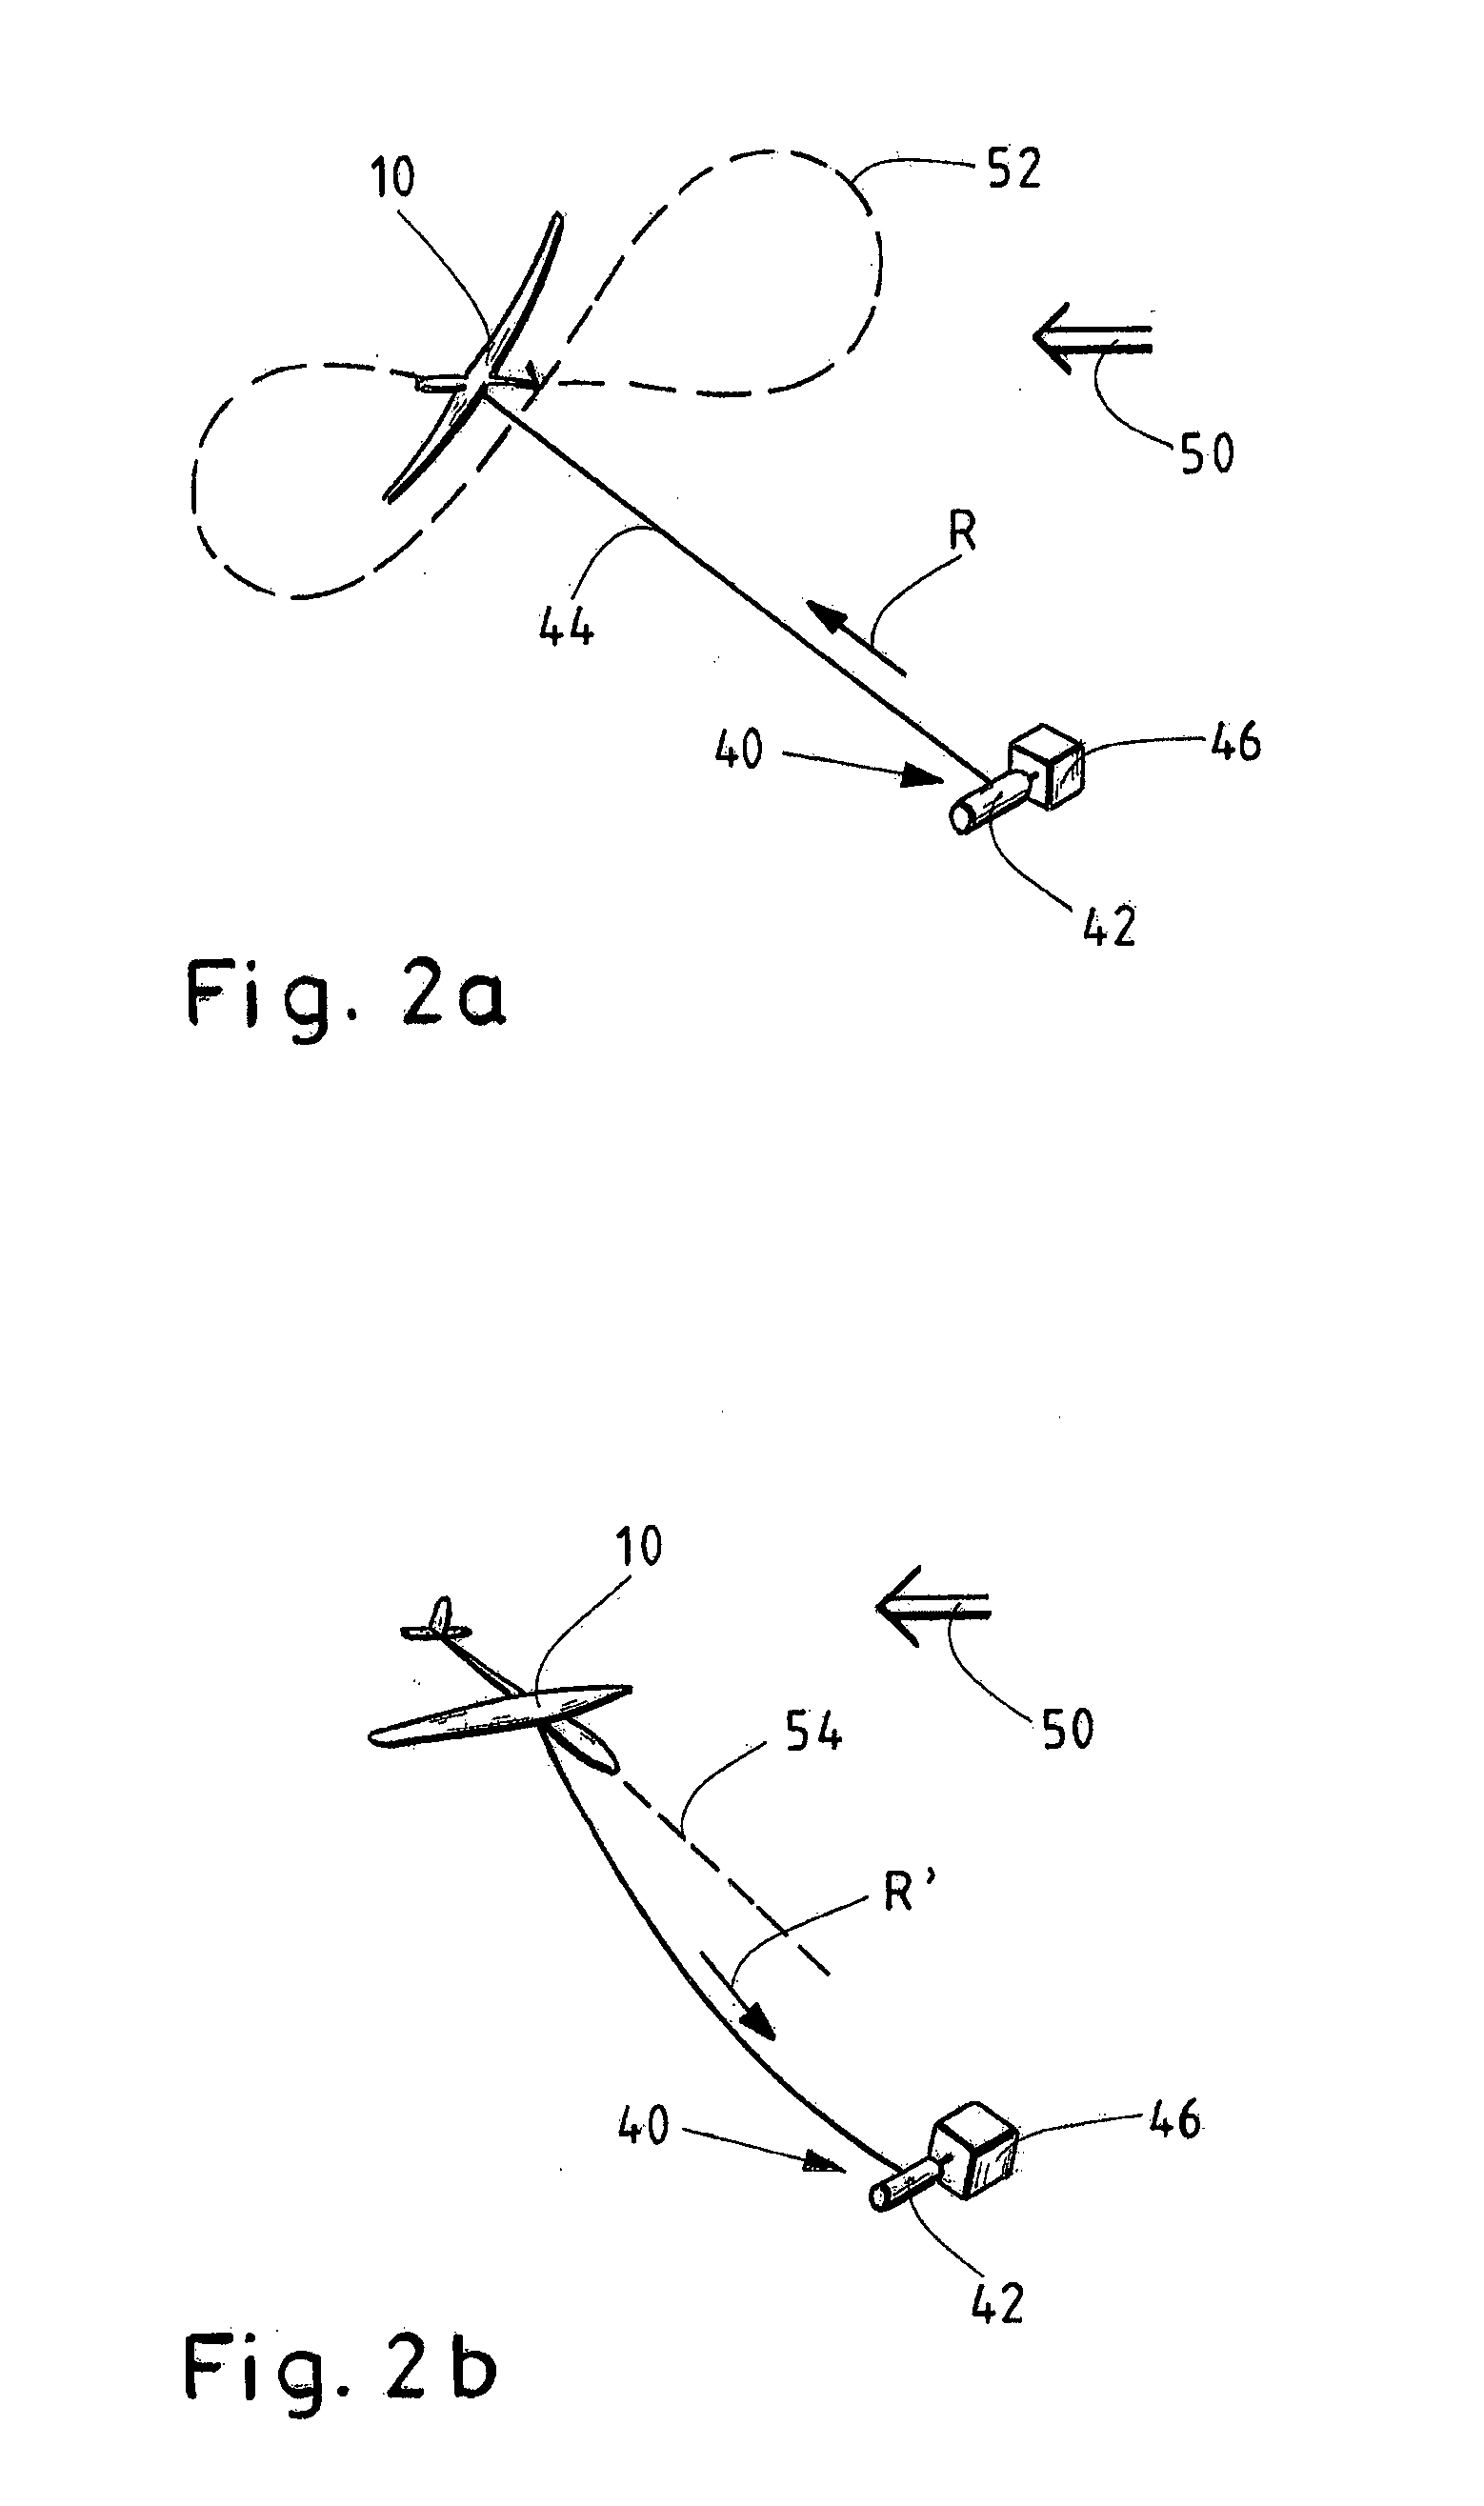 System and method for airborne wind energy production